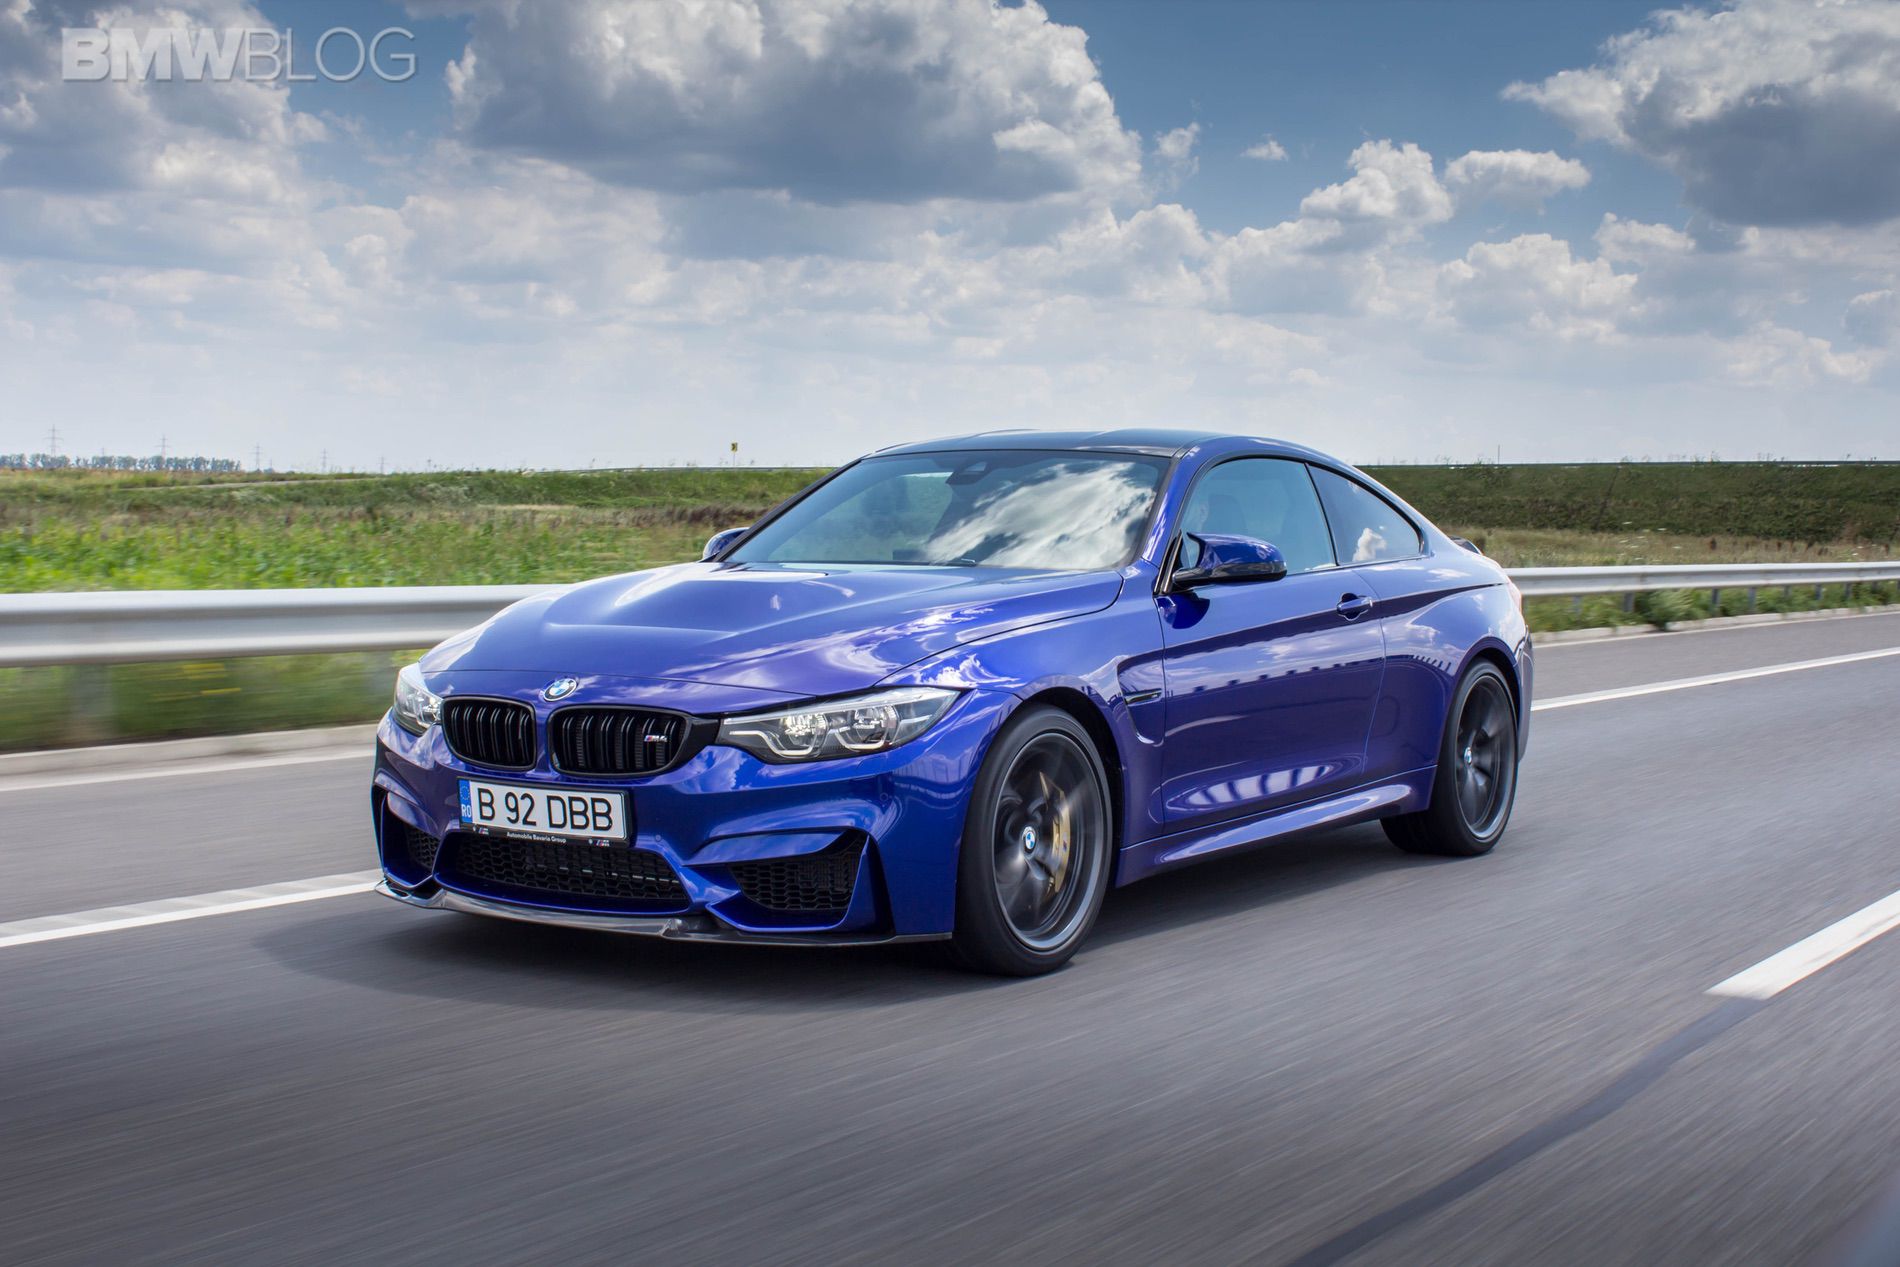 TEST DRIVE: 2018 BMW M4 CS – For the Track Fiends